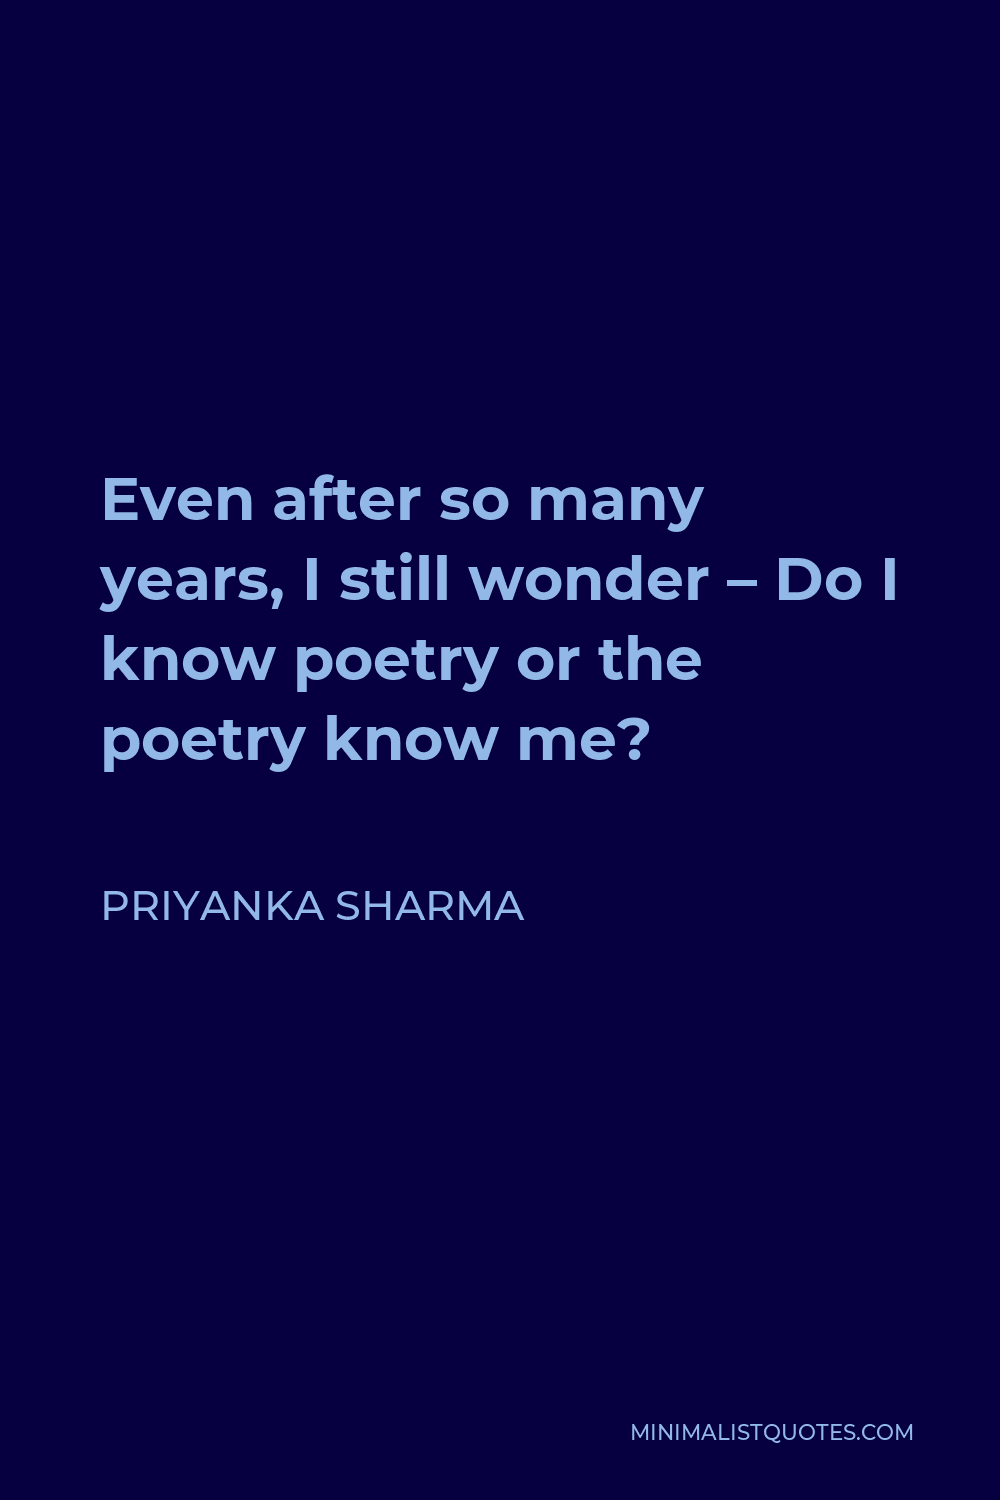 Priyanka Sharma Quote - Even after so many years, I still wonder – Do I know poetry or the poetry know me?